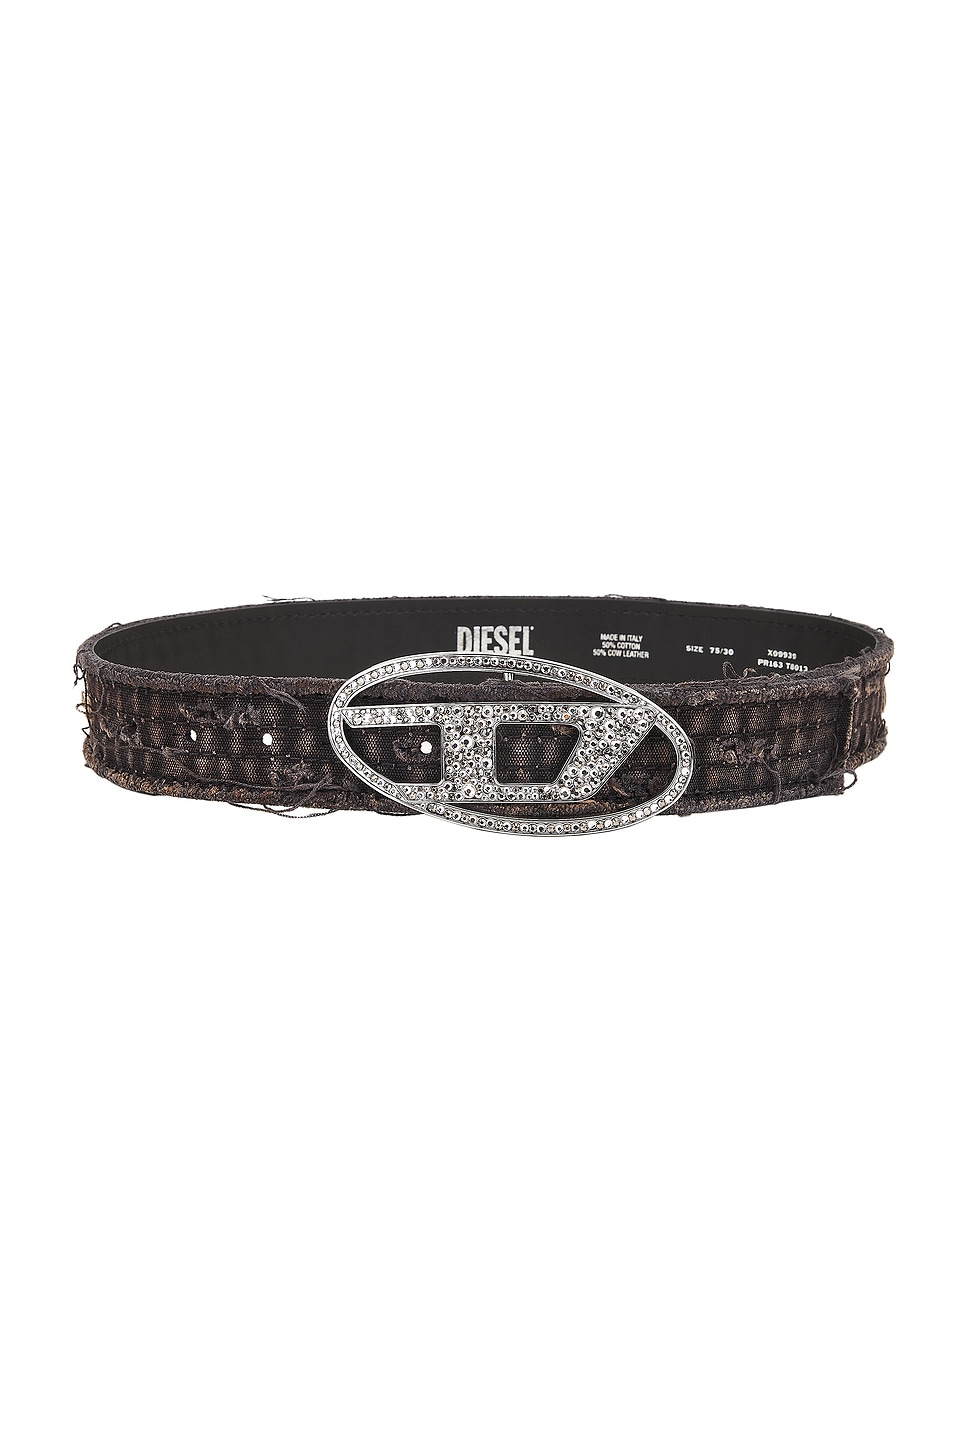 1DR Strass Belt in Charcoal